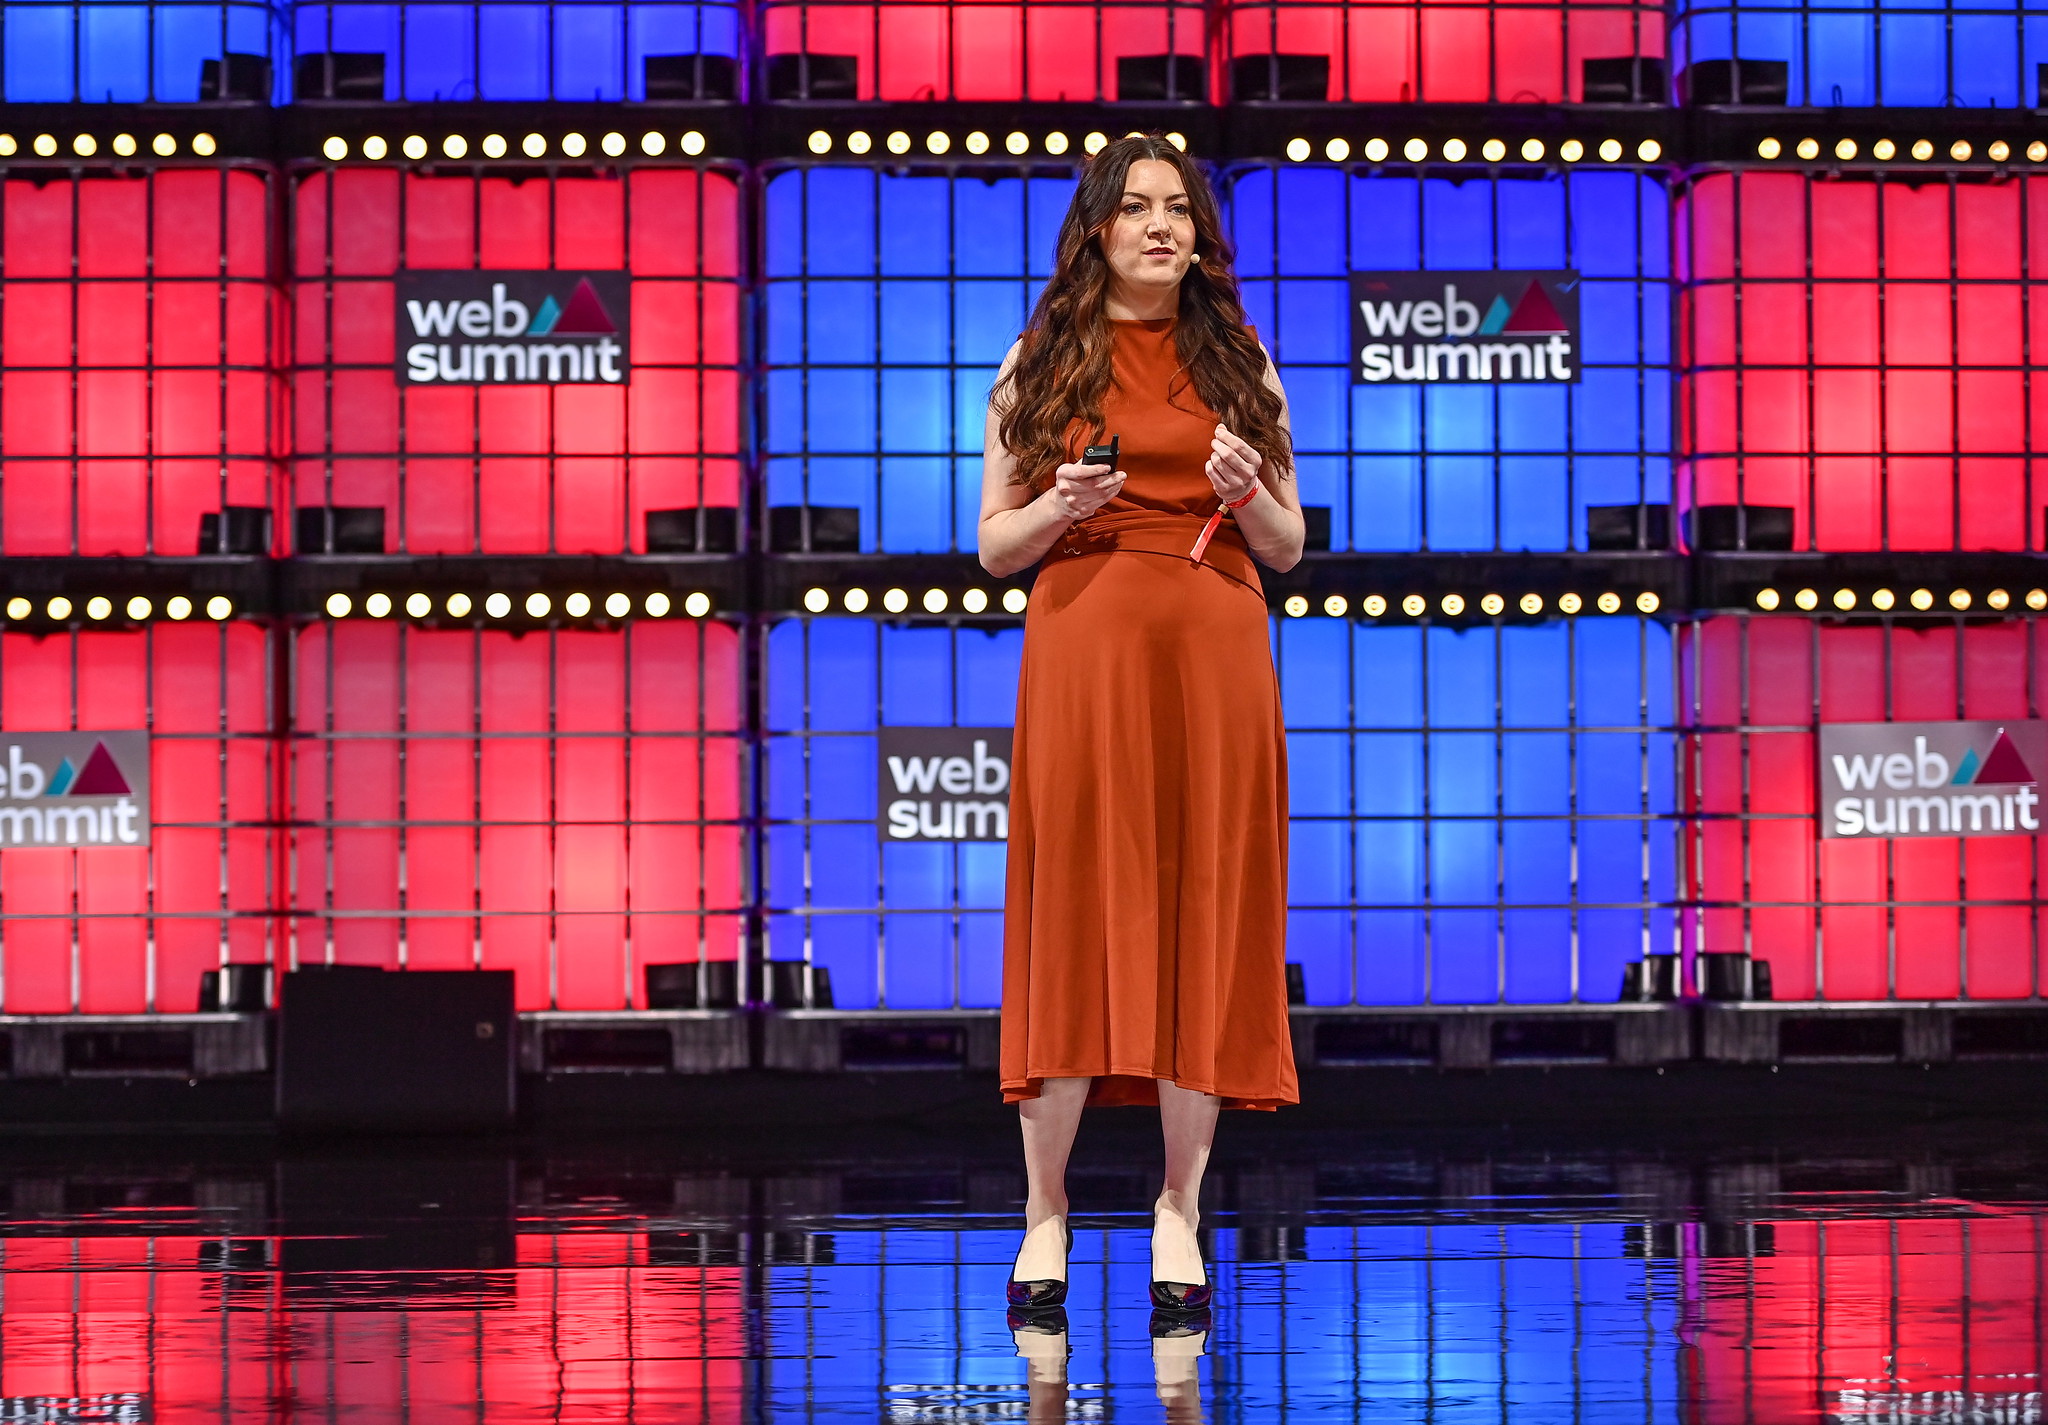 Abbie Morris, Co-founder & CEO, Compare Ethics, on Centre stage during day two of Web Summit 2022